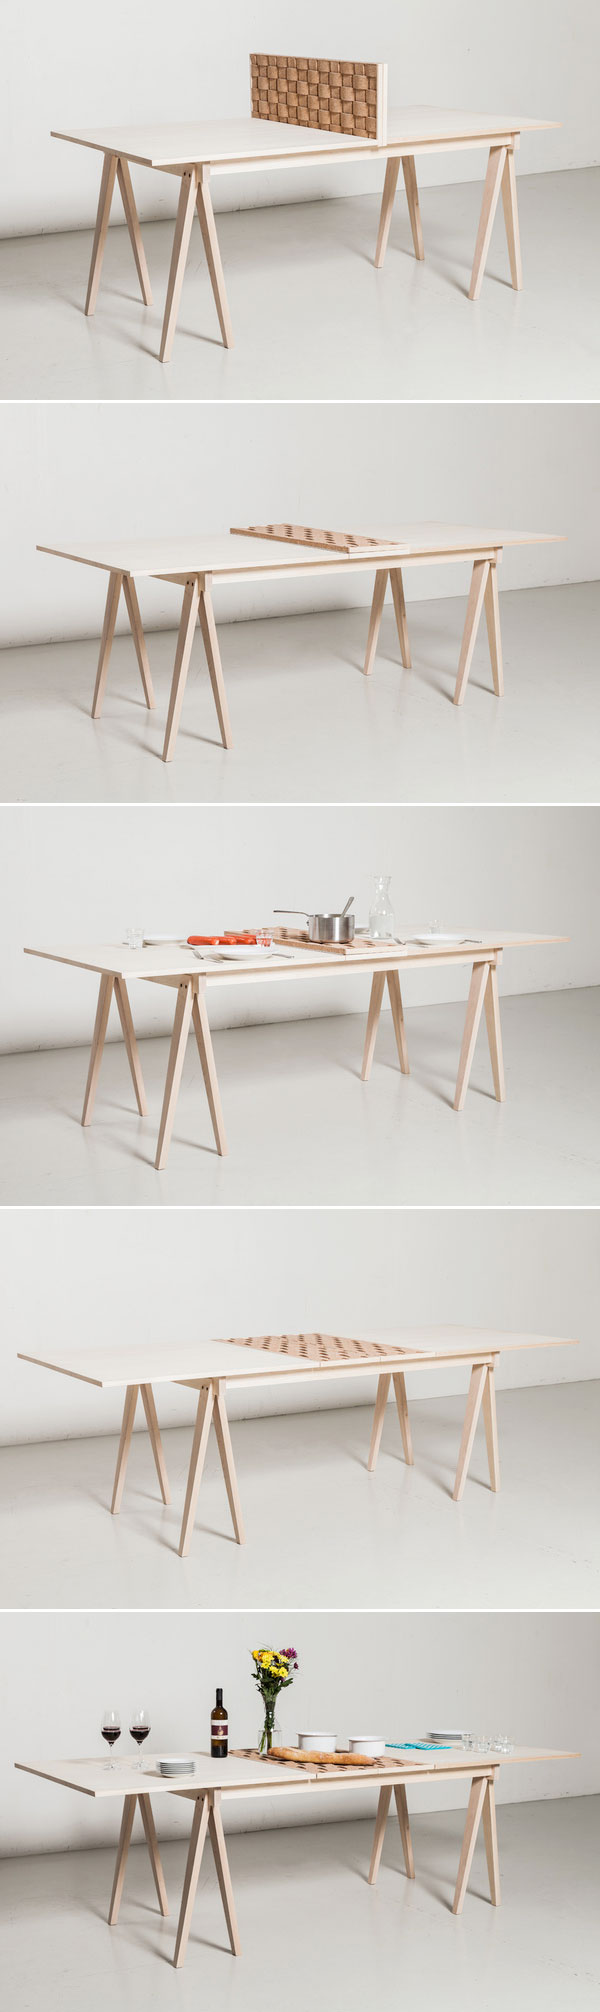 3-Extendable-dining-table